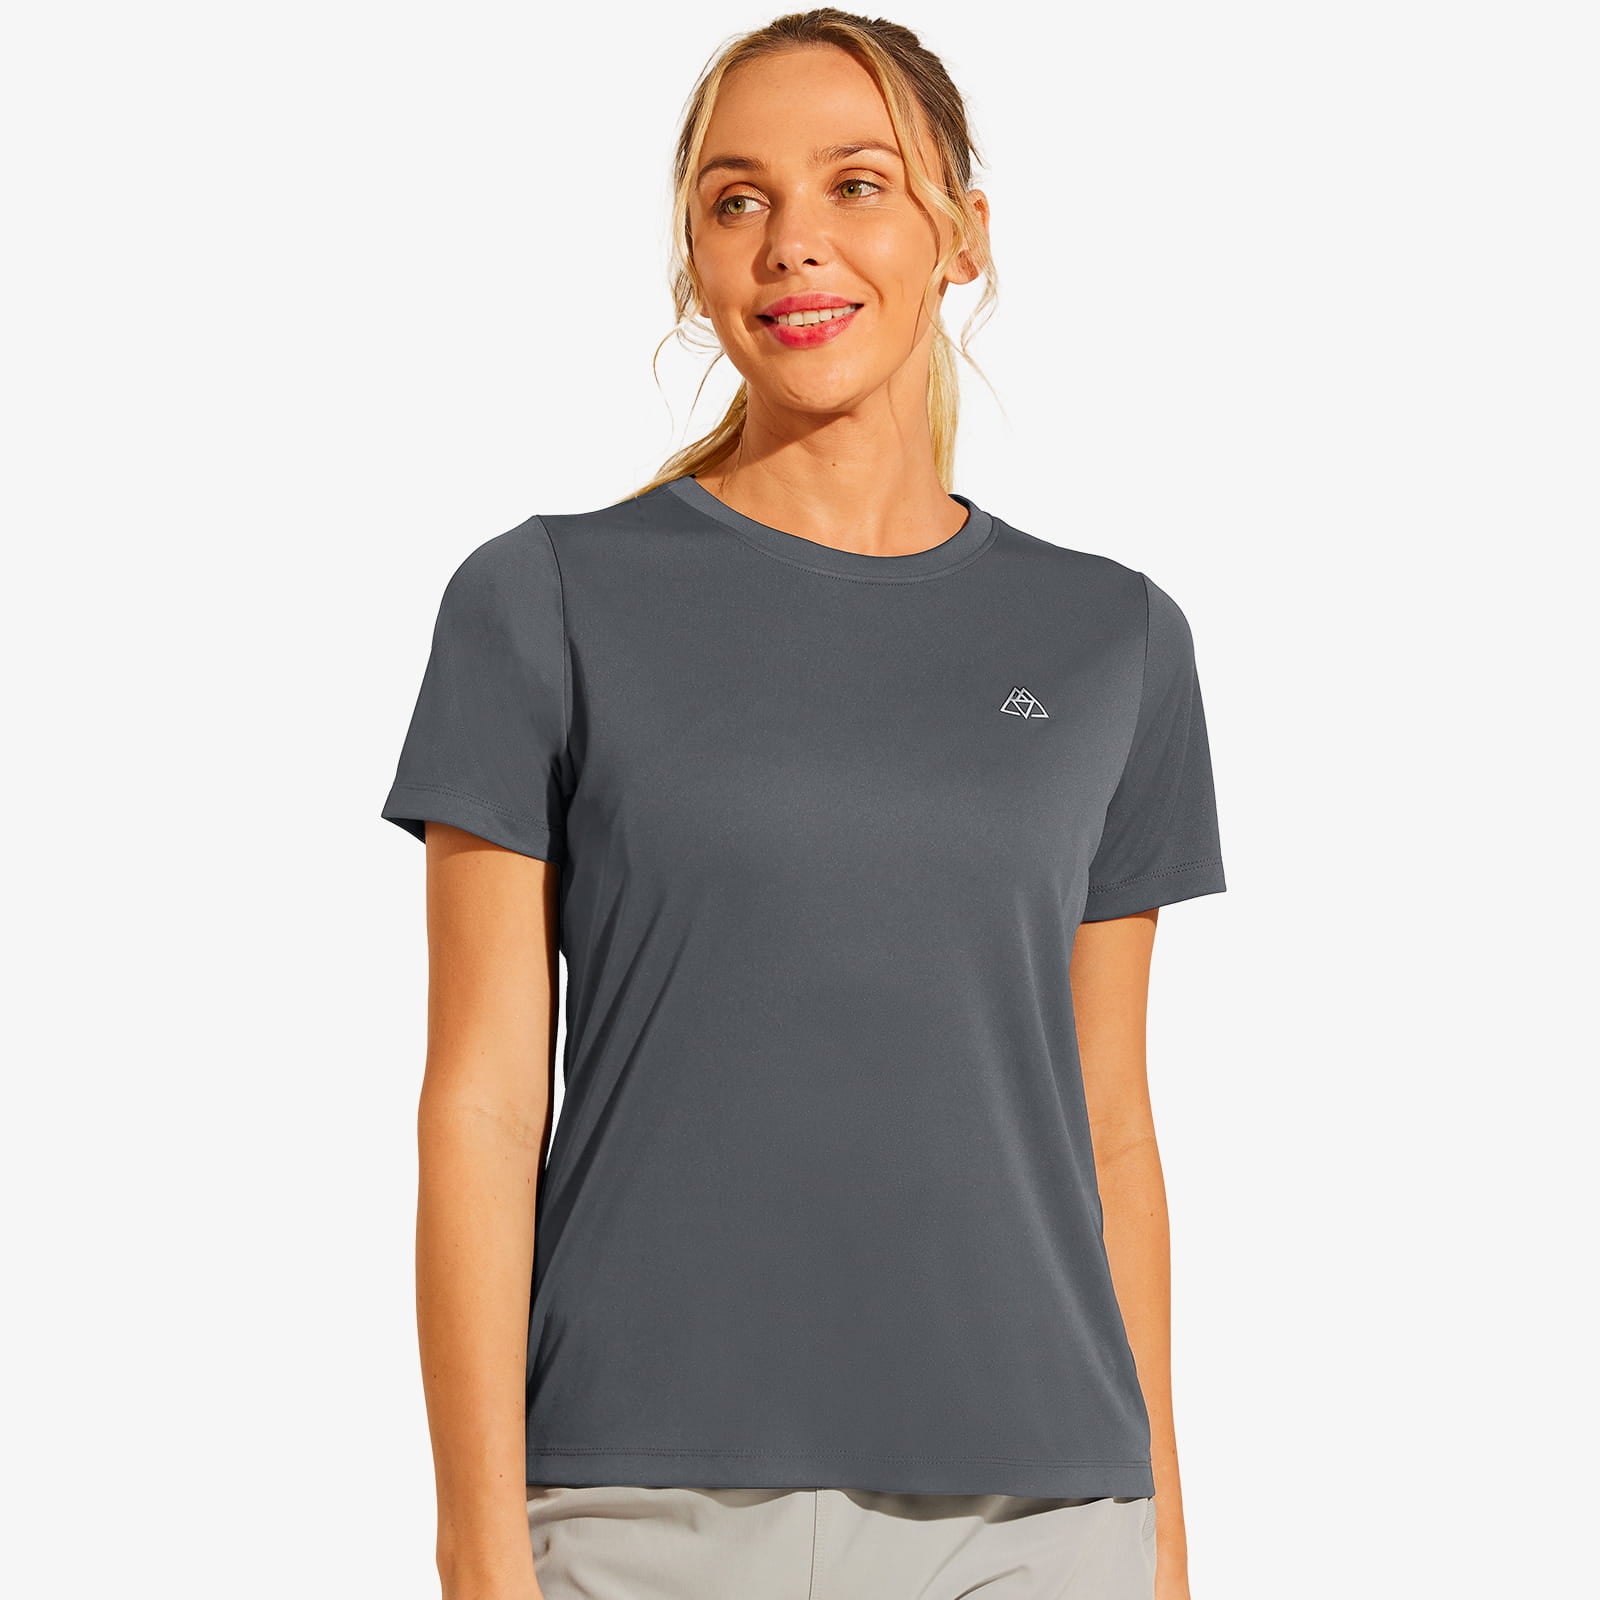 Haimont Women's Athletic Running T-Shirts Dry Fit Shirts